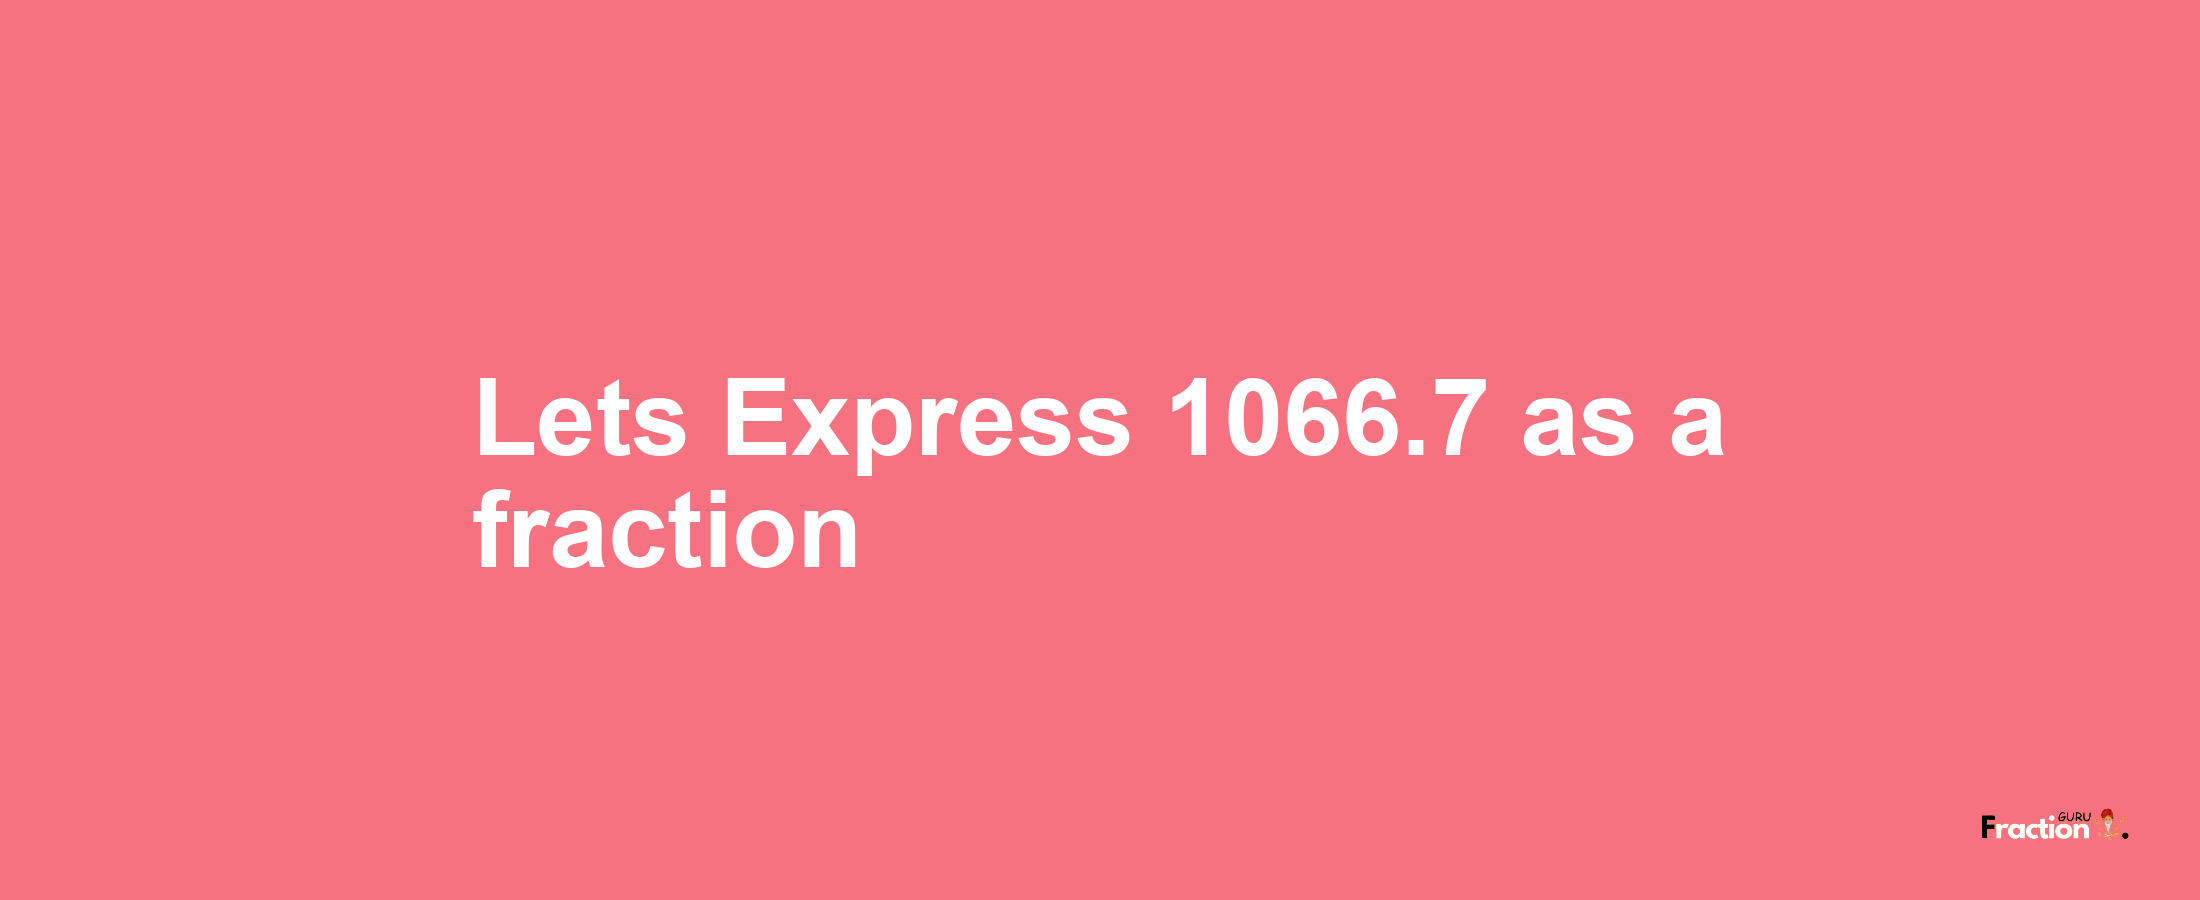 Lets Express 1066.7 as afraction